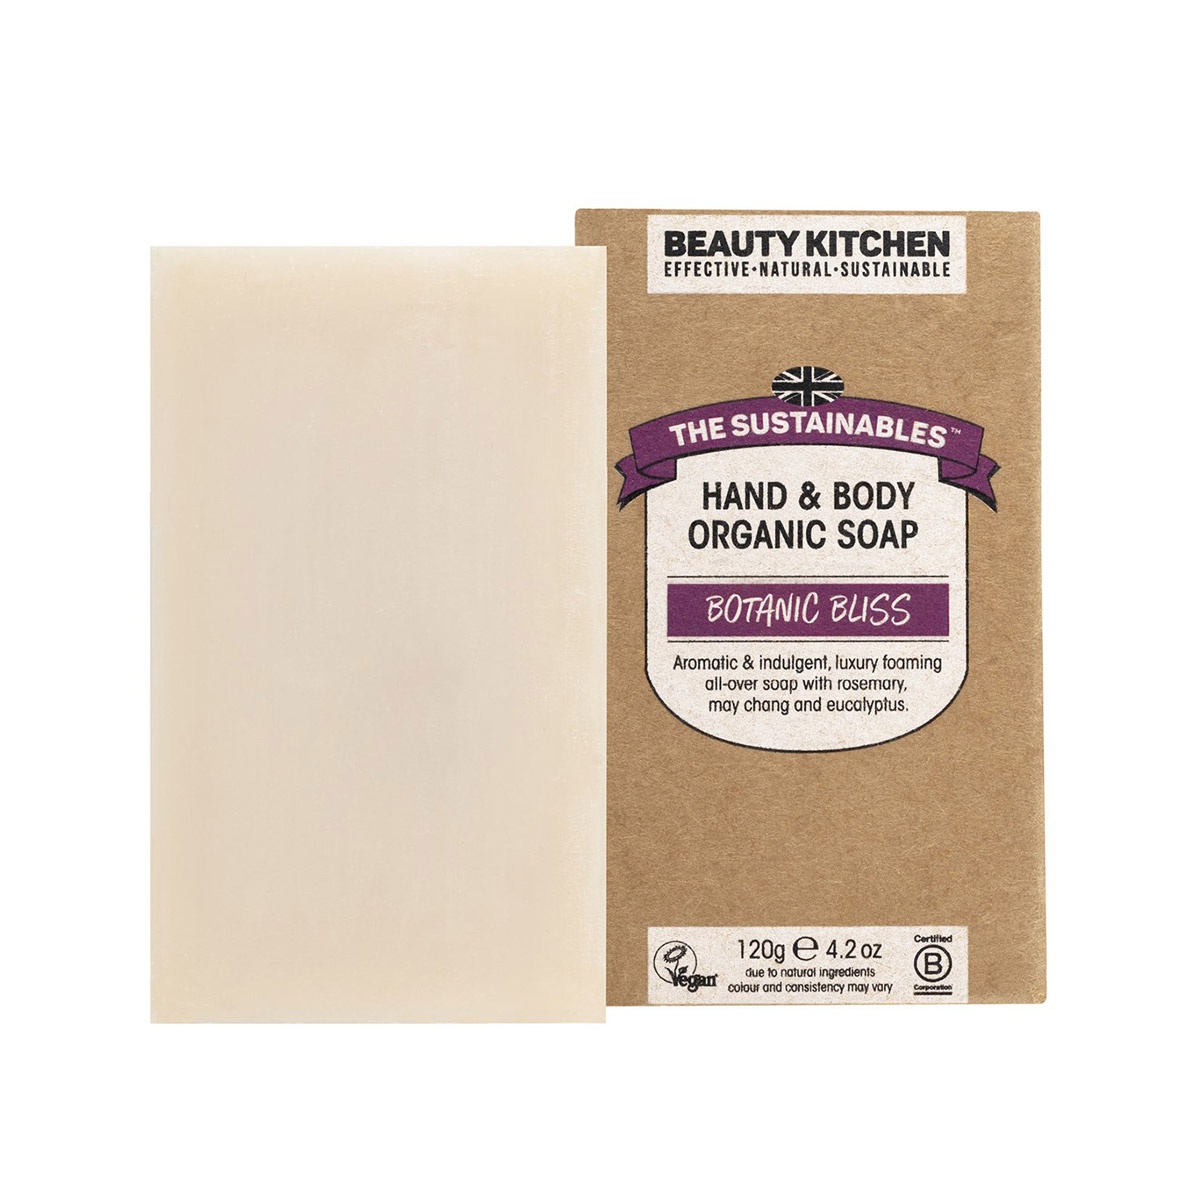 EFFECTIVE-NATURAL-SUSTAINABLE 2y z P L TS HAND BODY ORGANIC SOAP G Aromatic indulgent, luxury foaming all-over soap with rosemary, may chang and eucalyptus. 